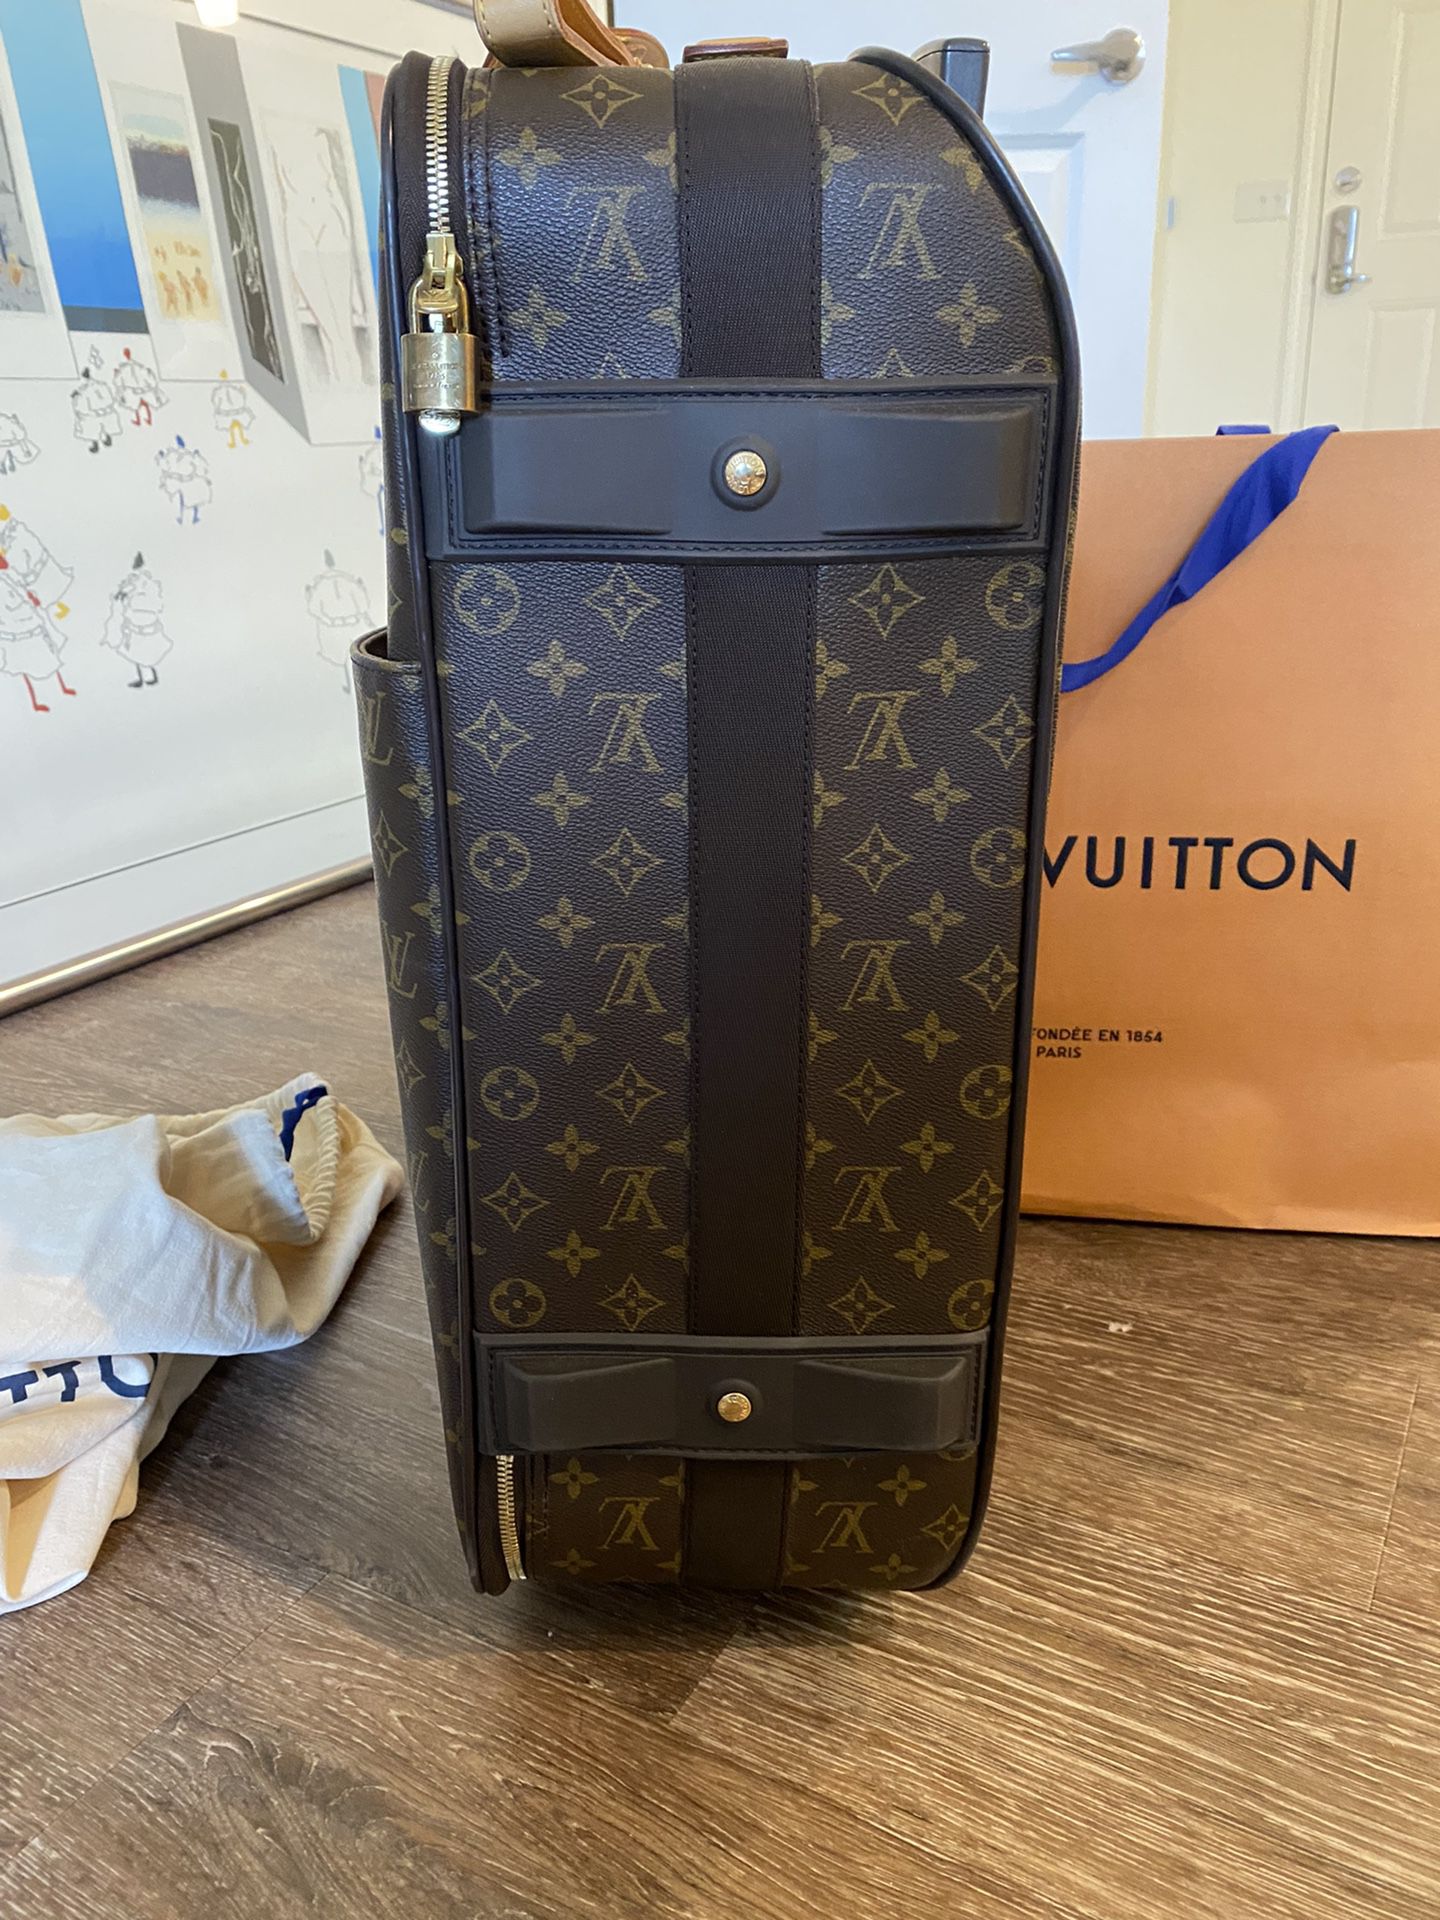 Louis Vuitton (Authentic) Bag Retail $1600 for Sale in Wayland, MA